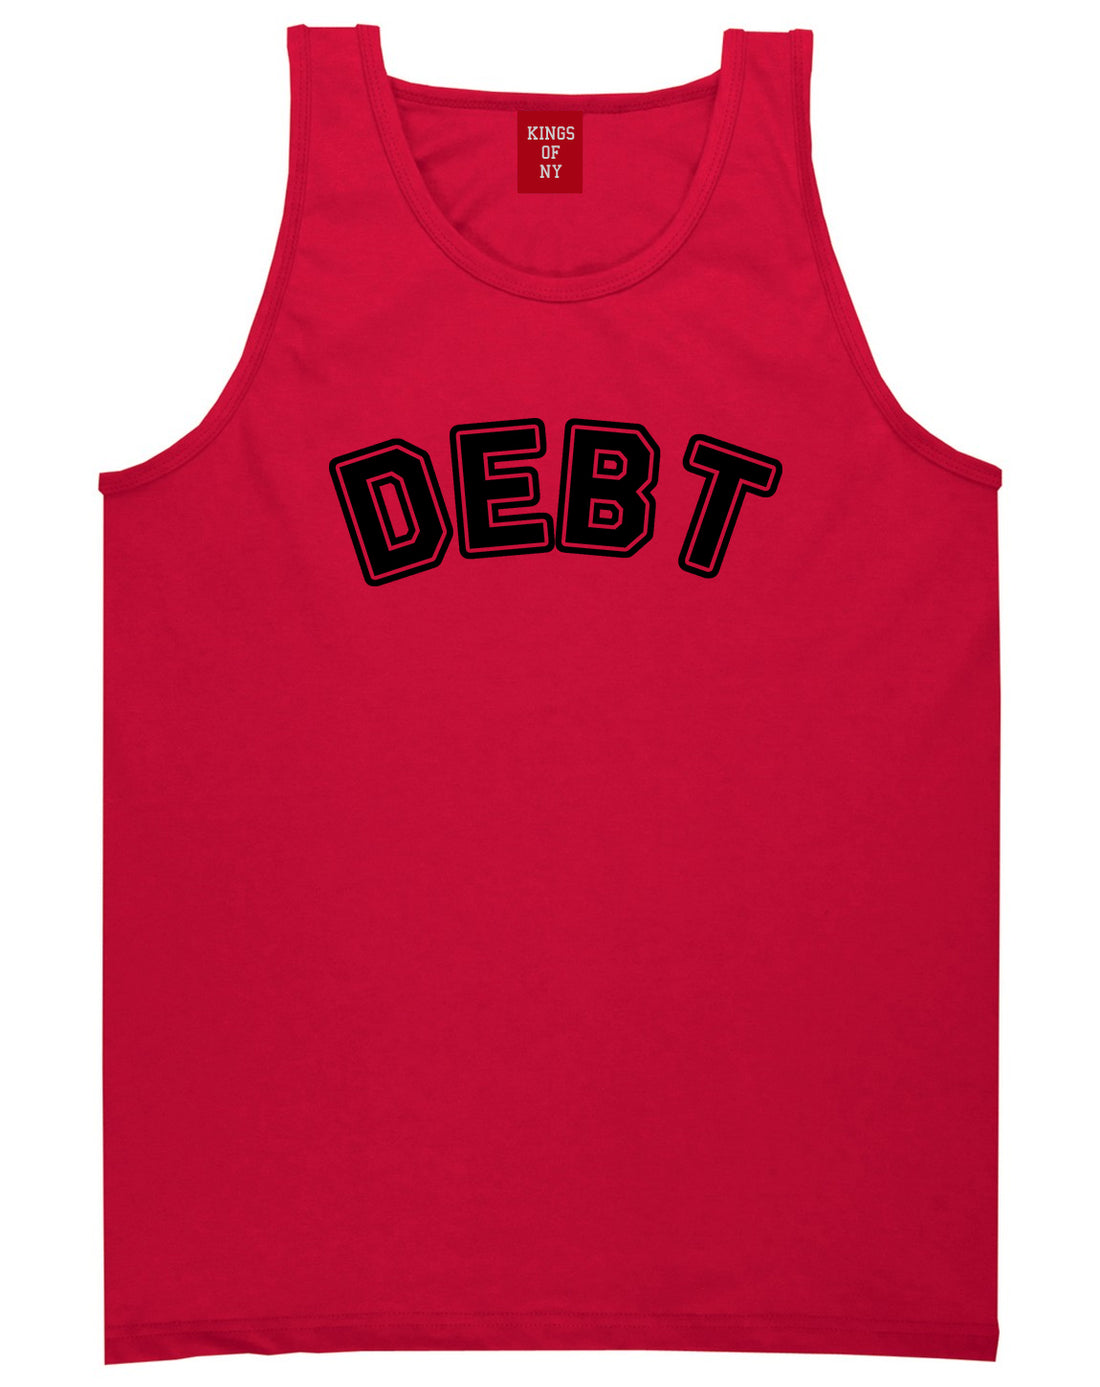 Debt Life T-Shirt in Red